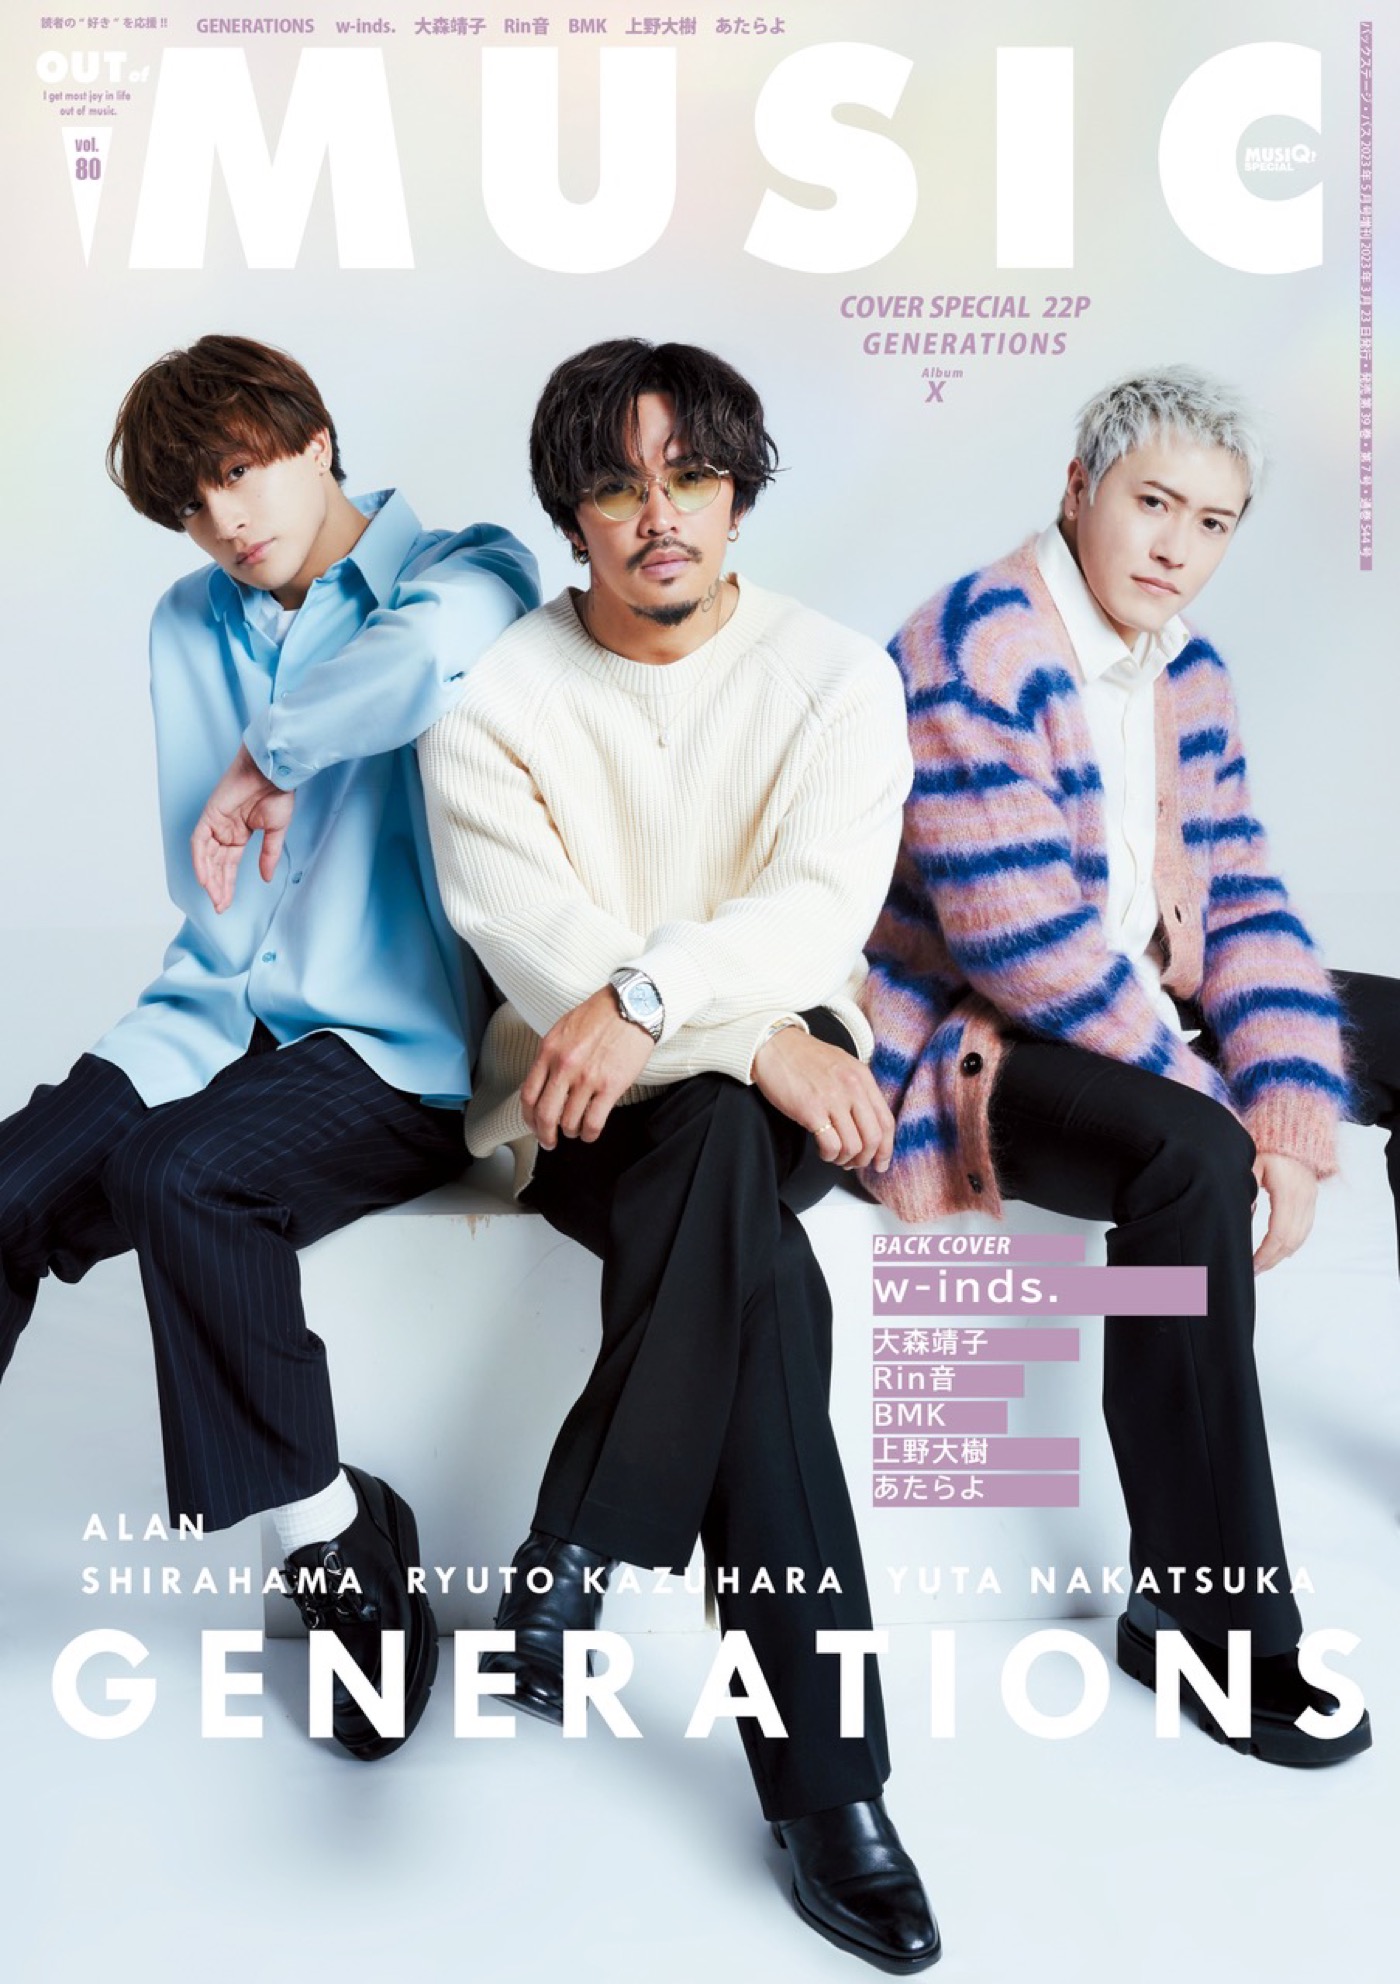 GENERATIONS、『MUSIQ? SPECIAL OUT of MUSIC Vol.80』表紙巻頭に登場 - 画像一覧（2/2）